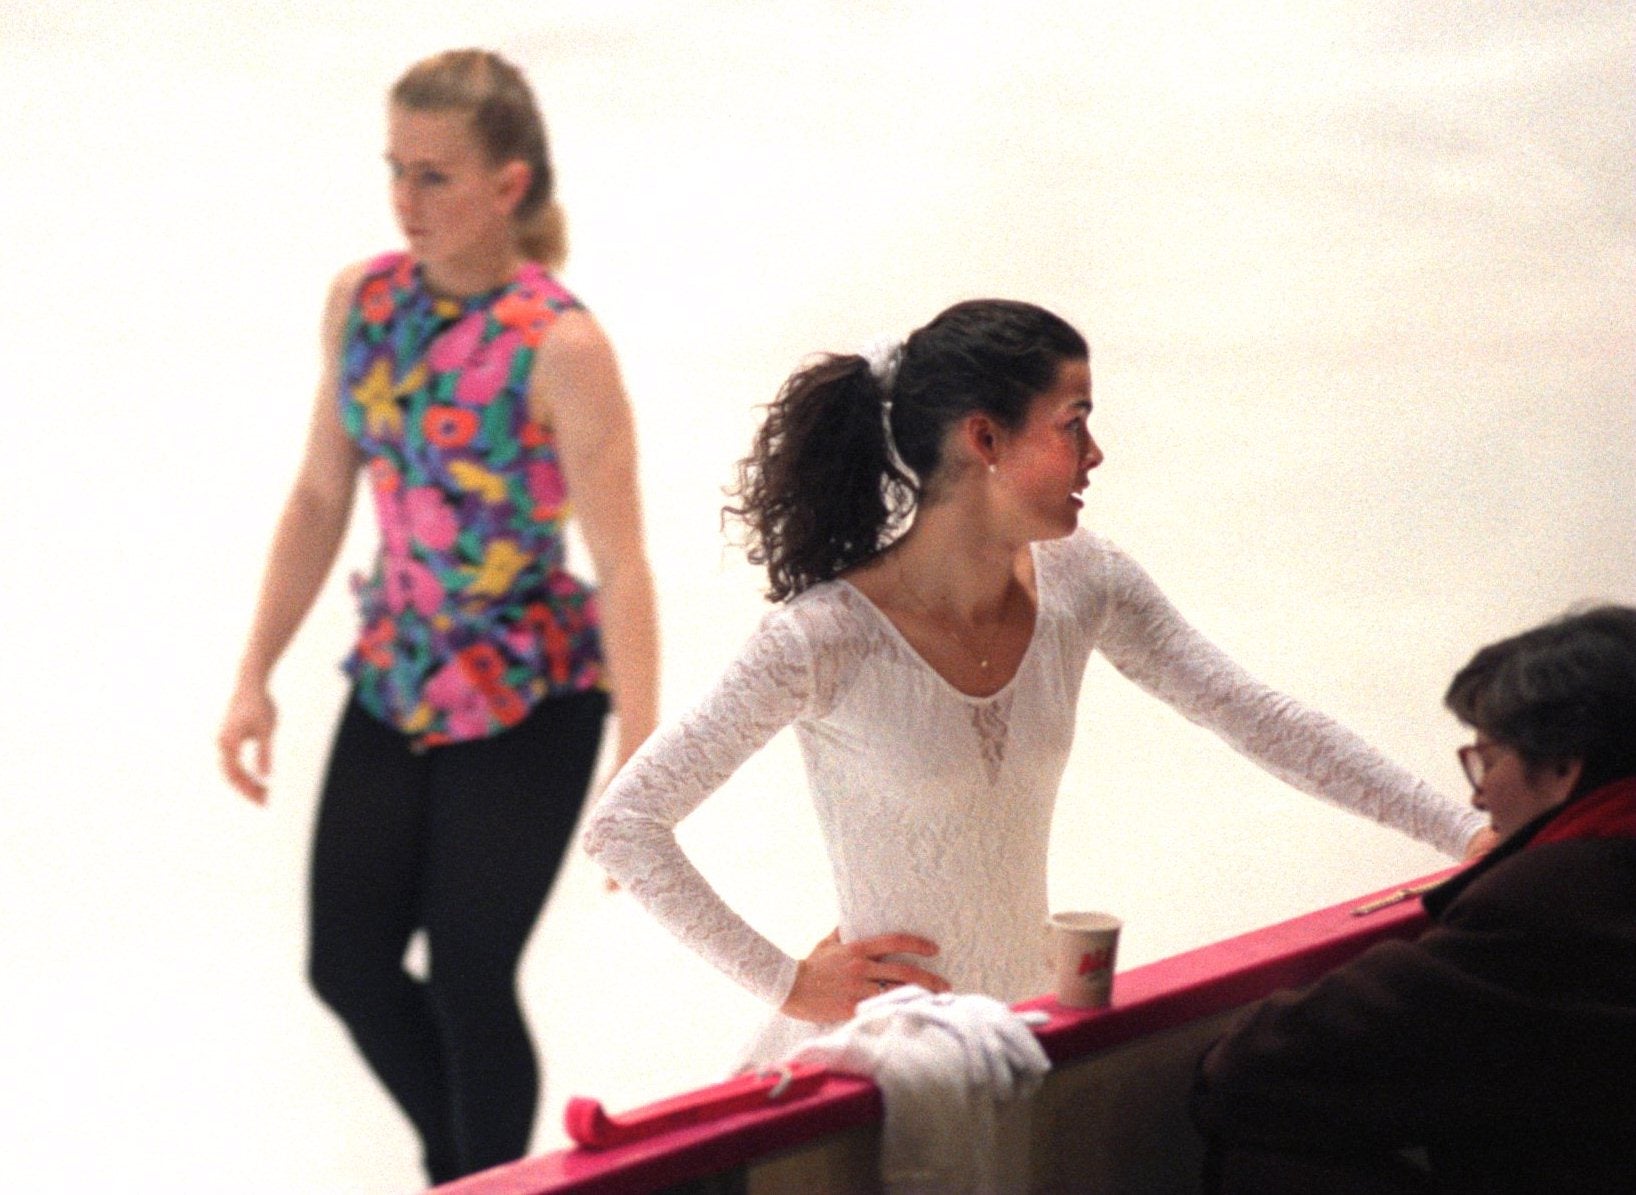 Tonya Harding and Nancy Kerrigan training together for the Winter Olympics in Lillehammer, 1994